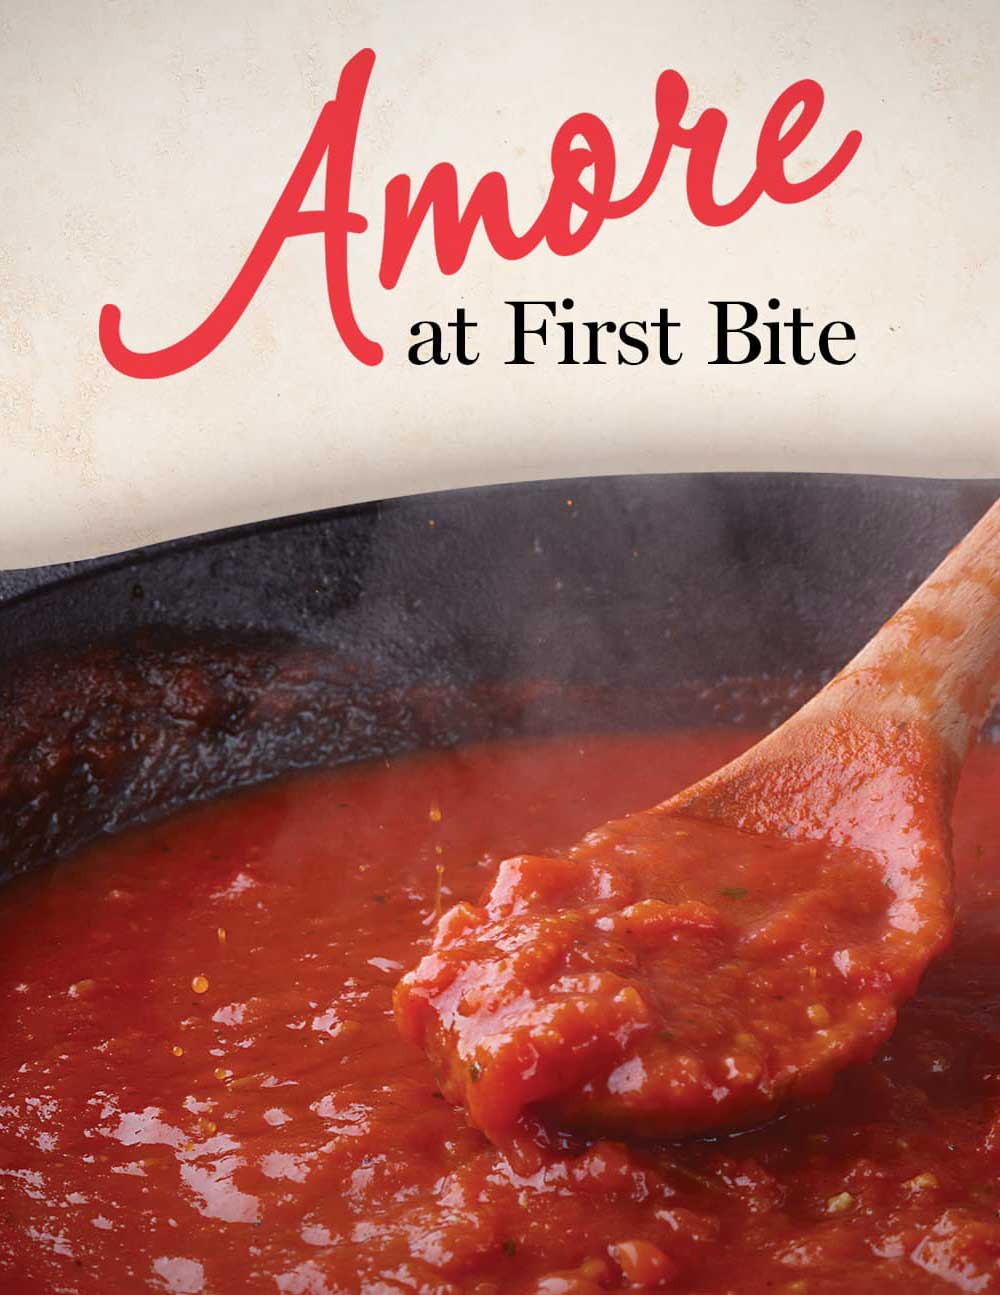 Amore at first bite